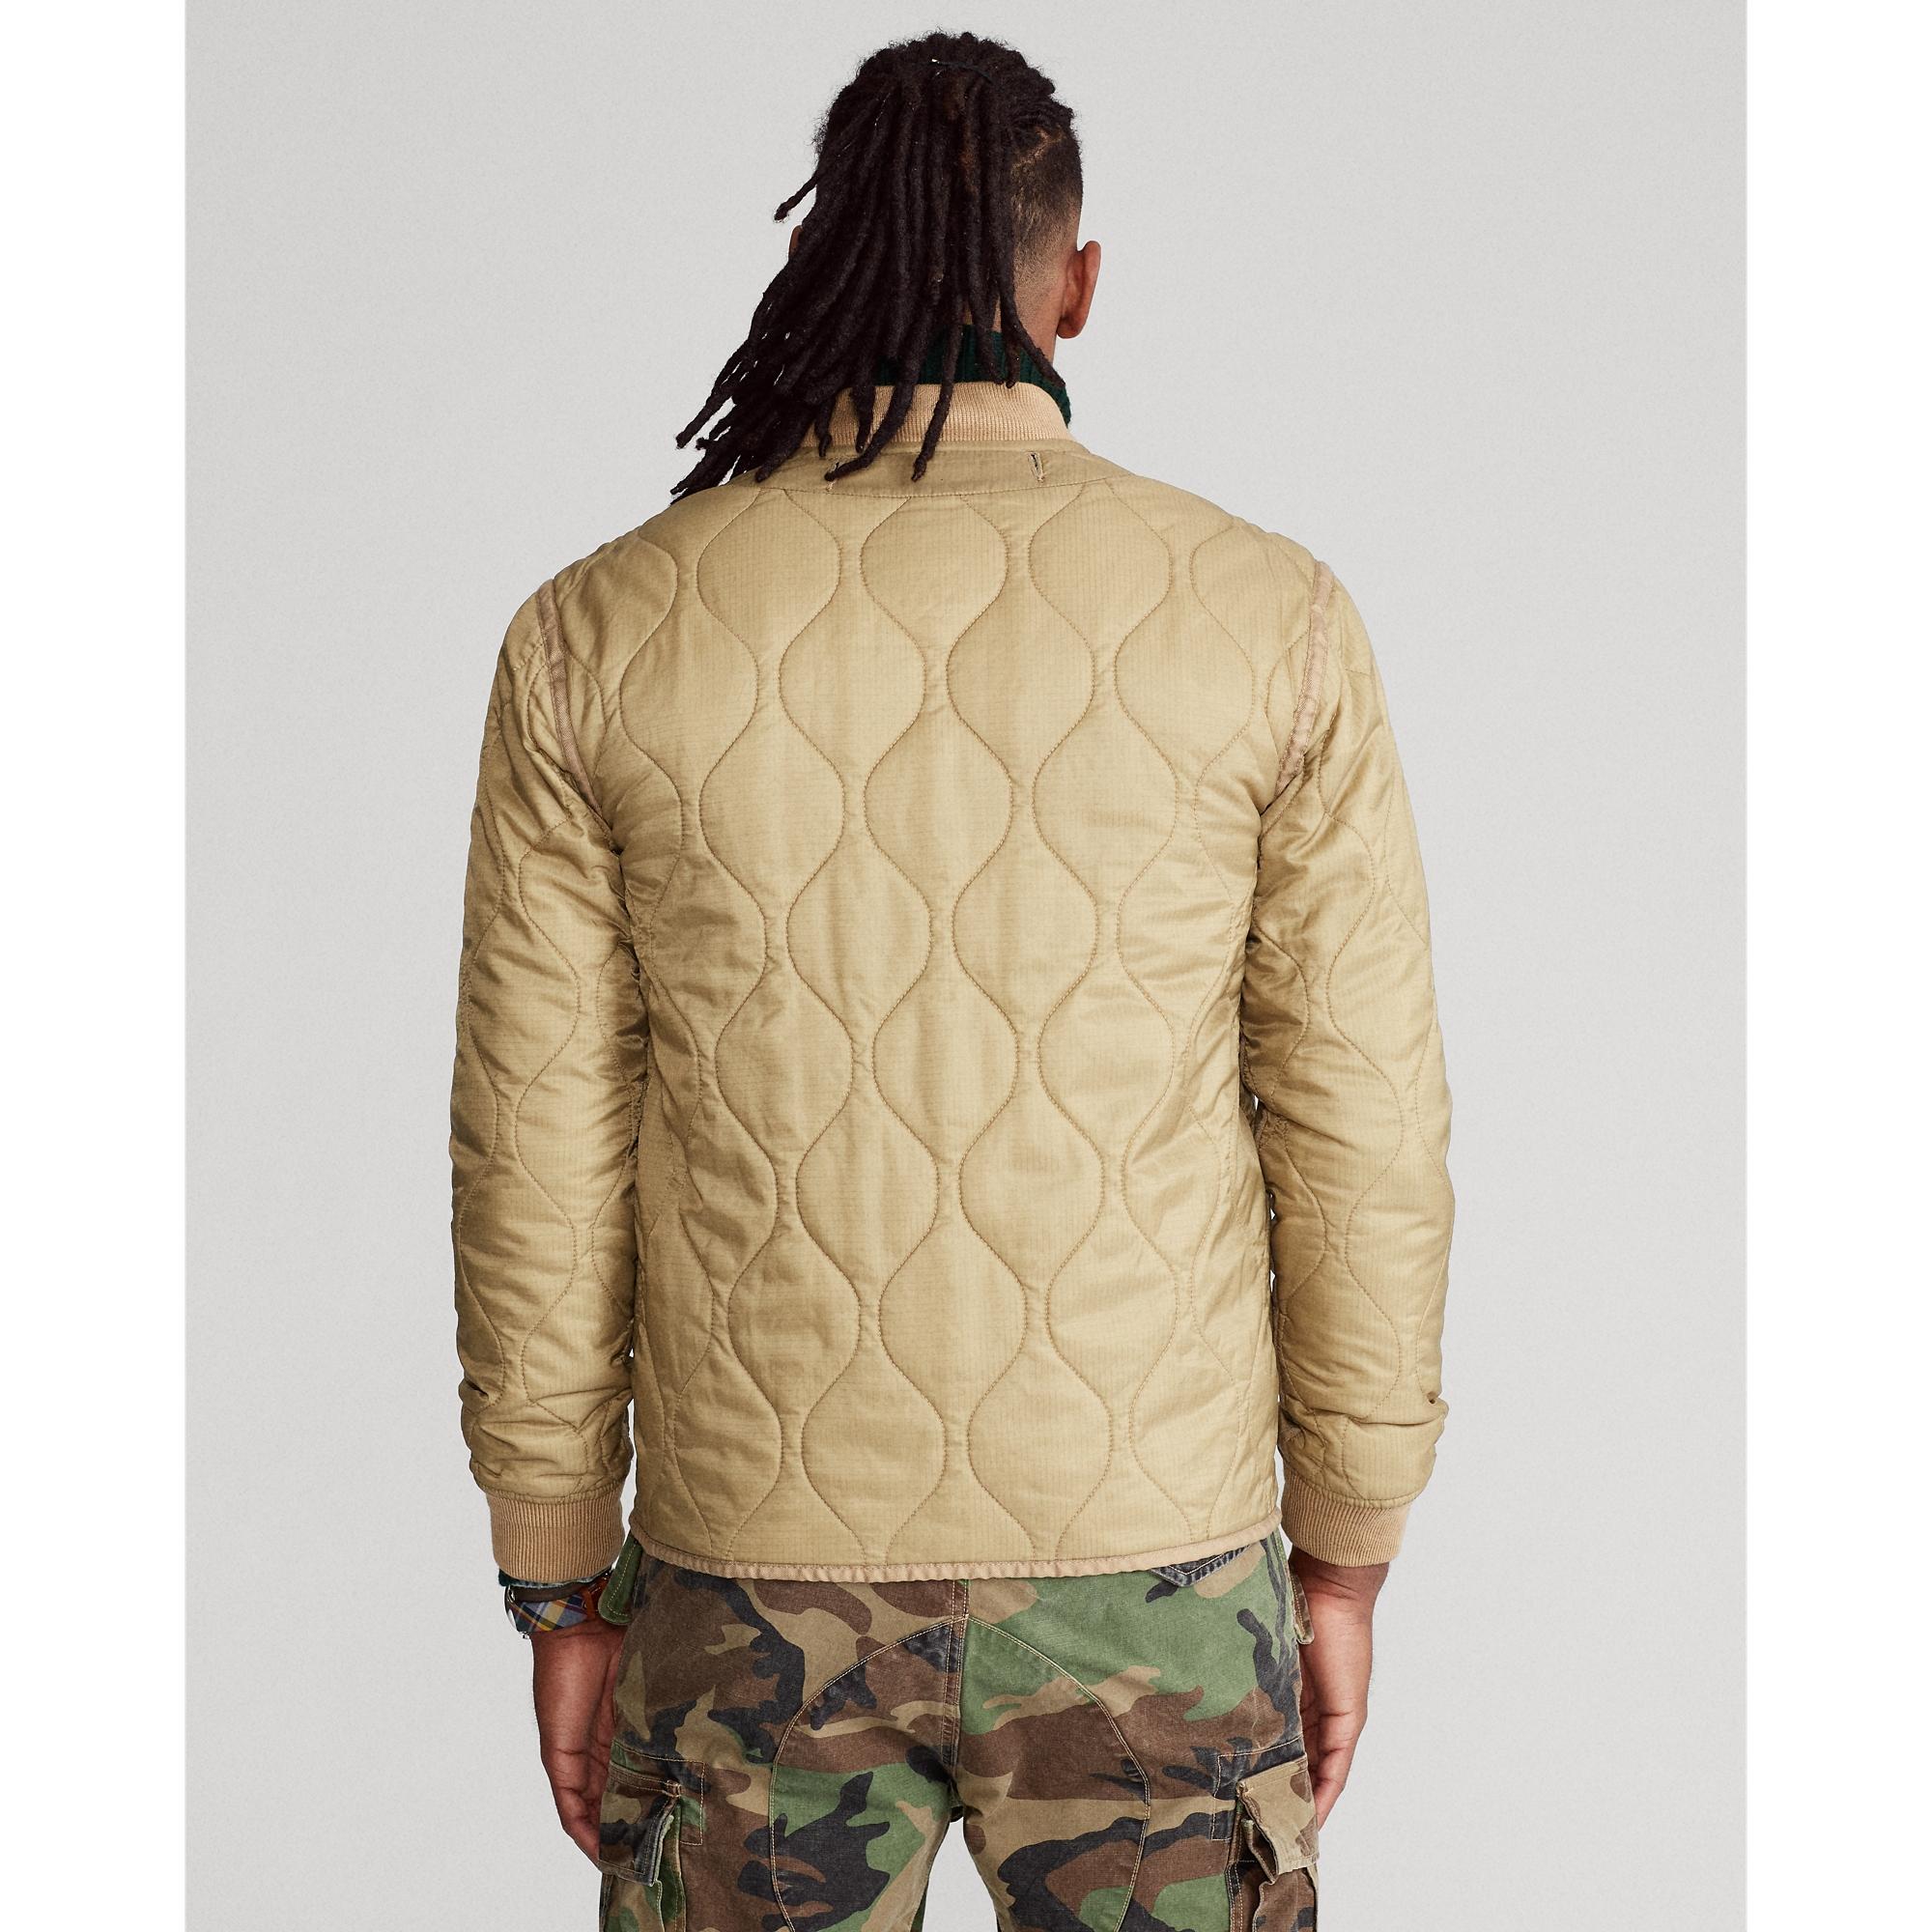 Polo Ralph Lauren Quilted Liner Jacket - Size S in Natural for Men 